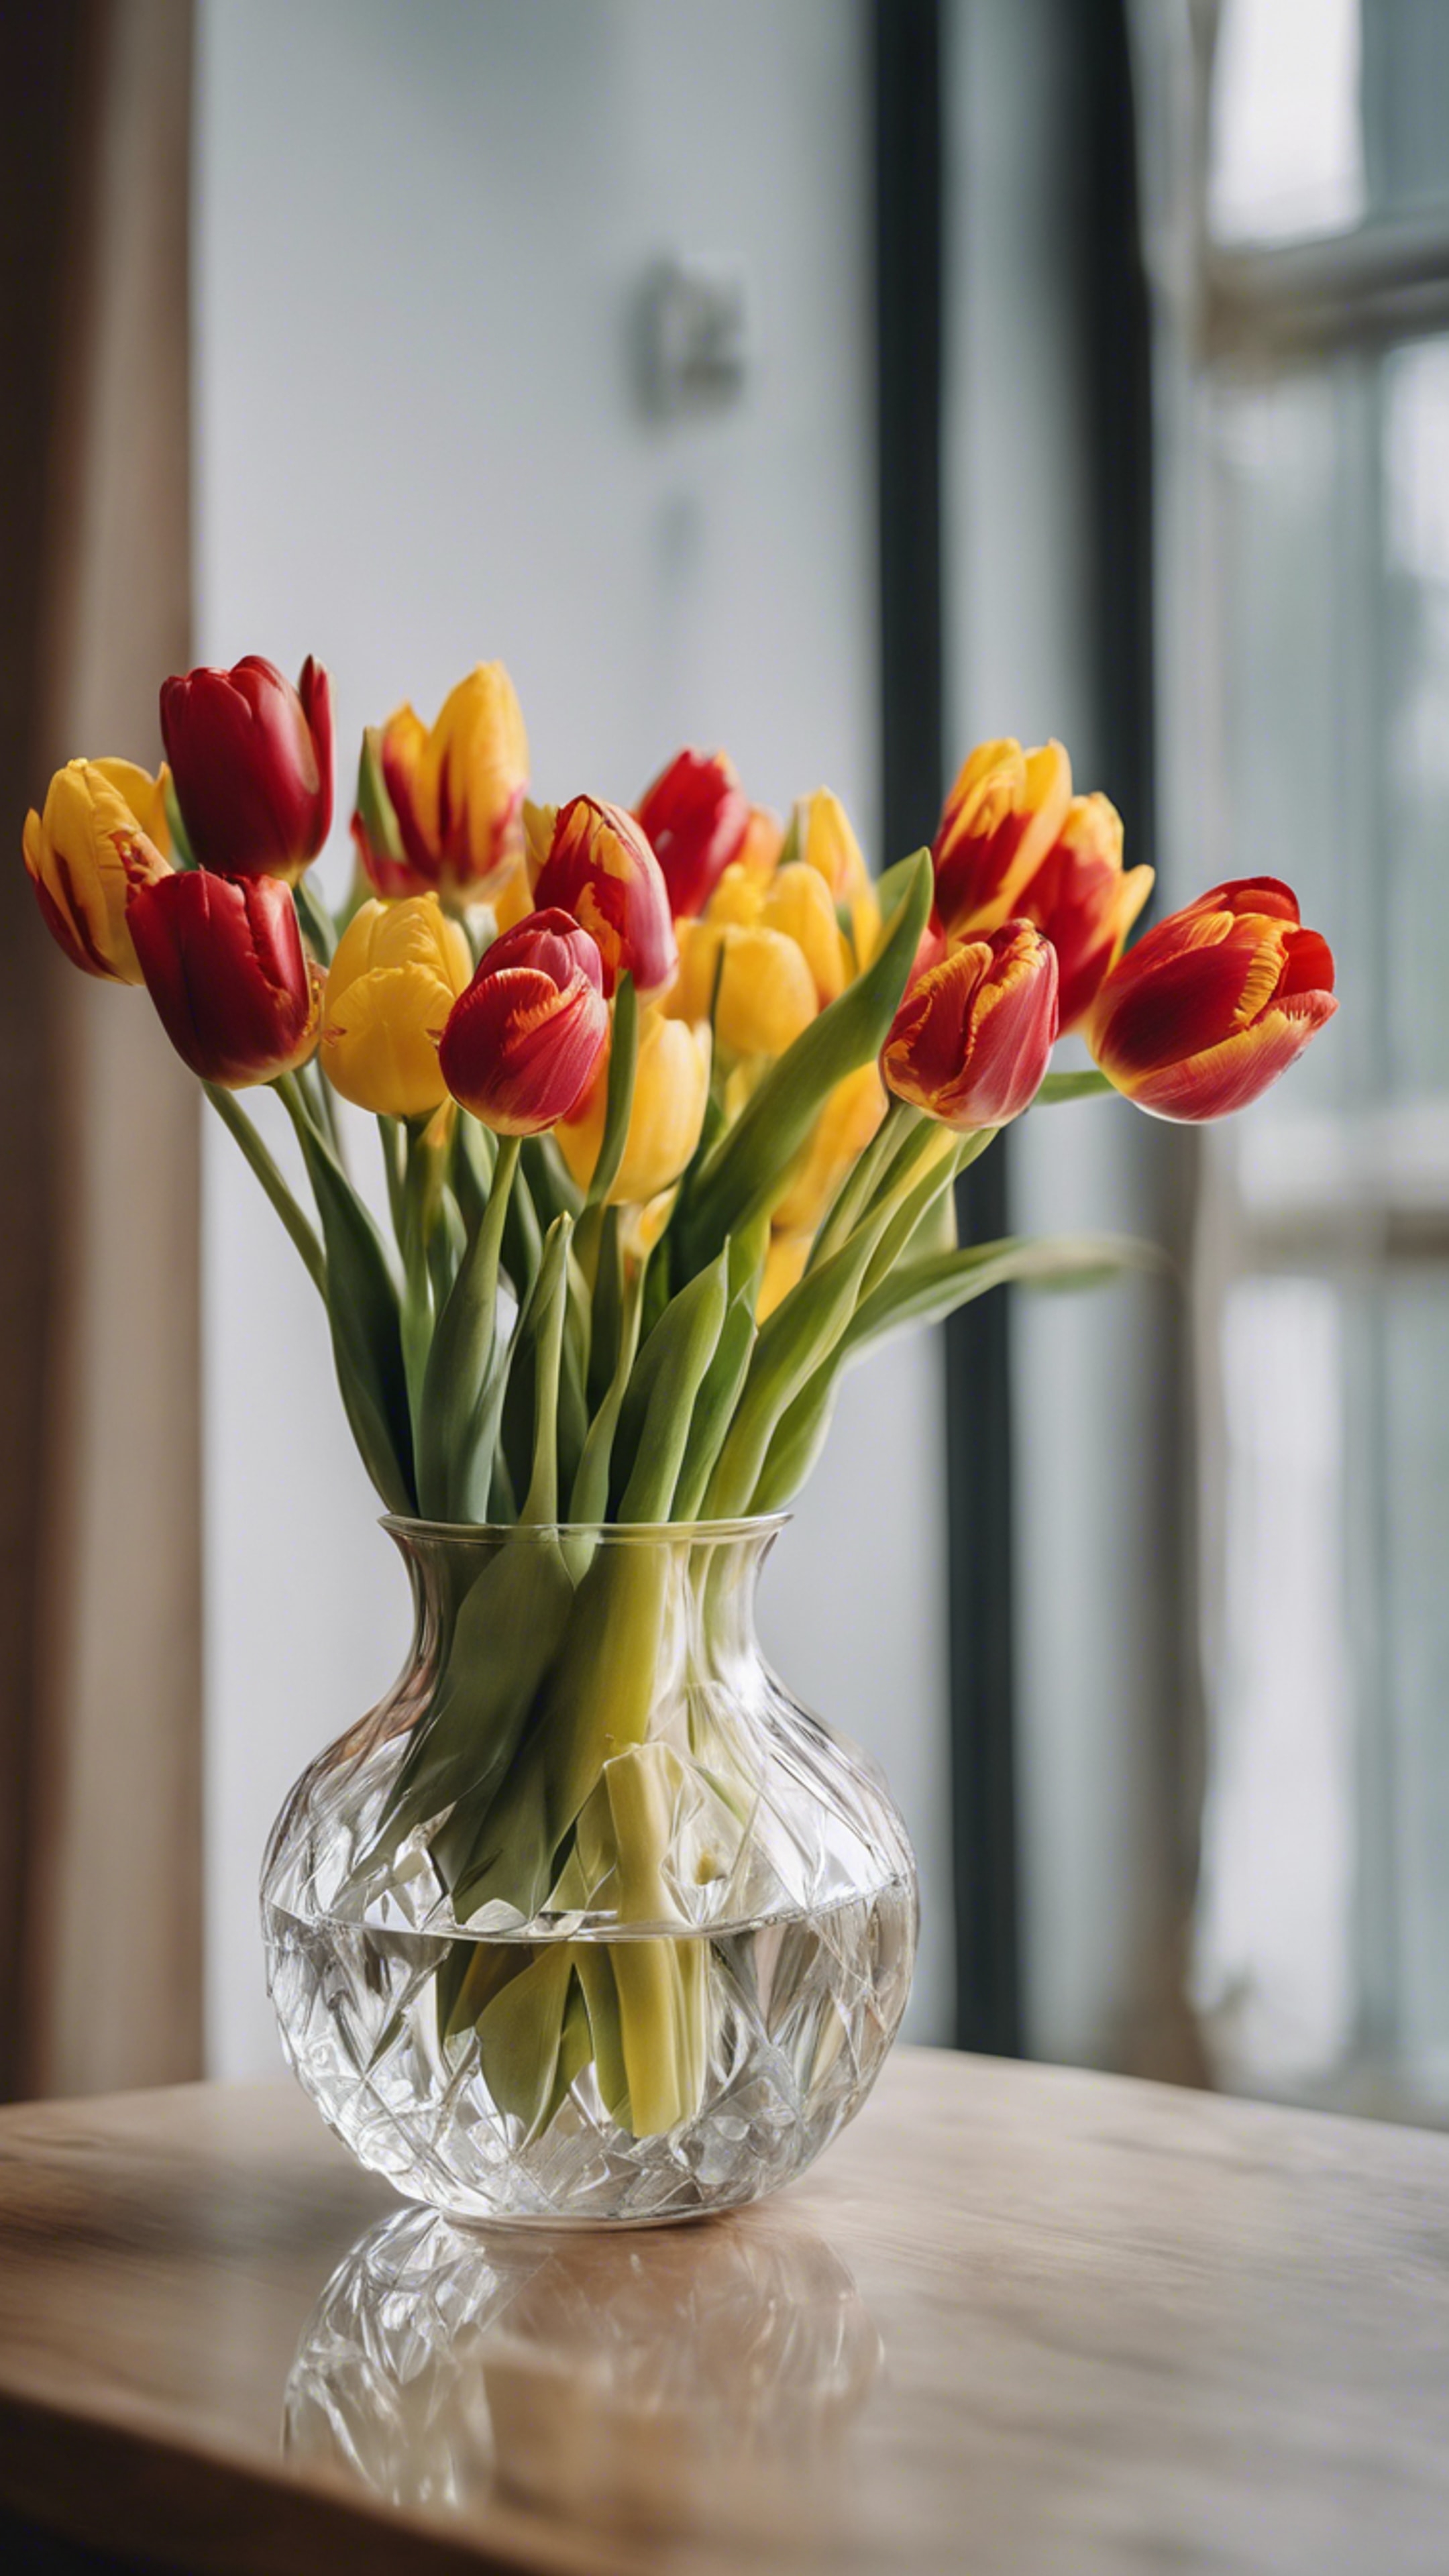 A bunch of fresh red and yellow tulips resting in a crystal clear vase. Валлпапер[770eab0b3cc545c1af9b]